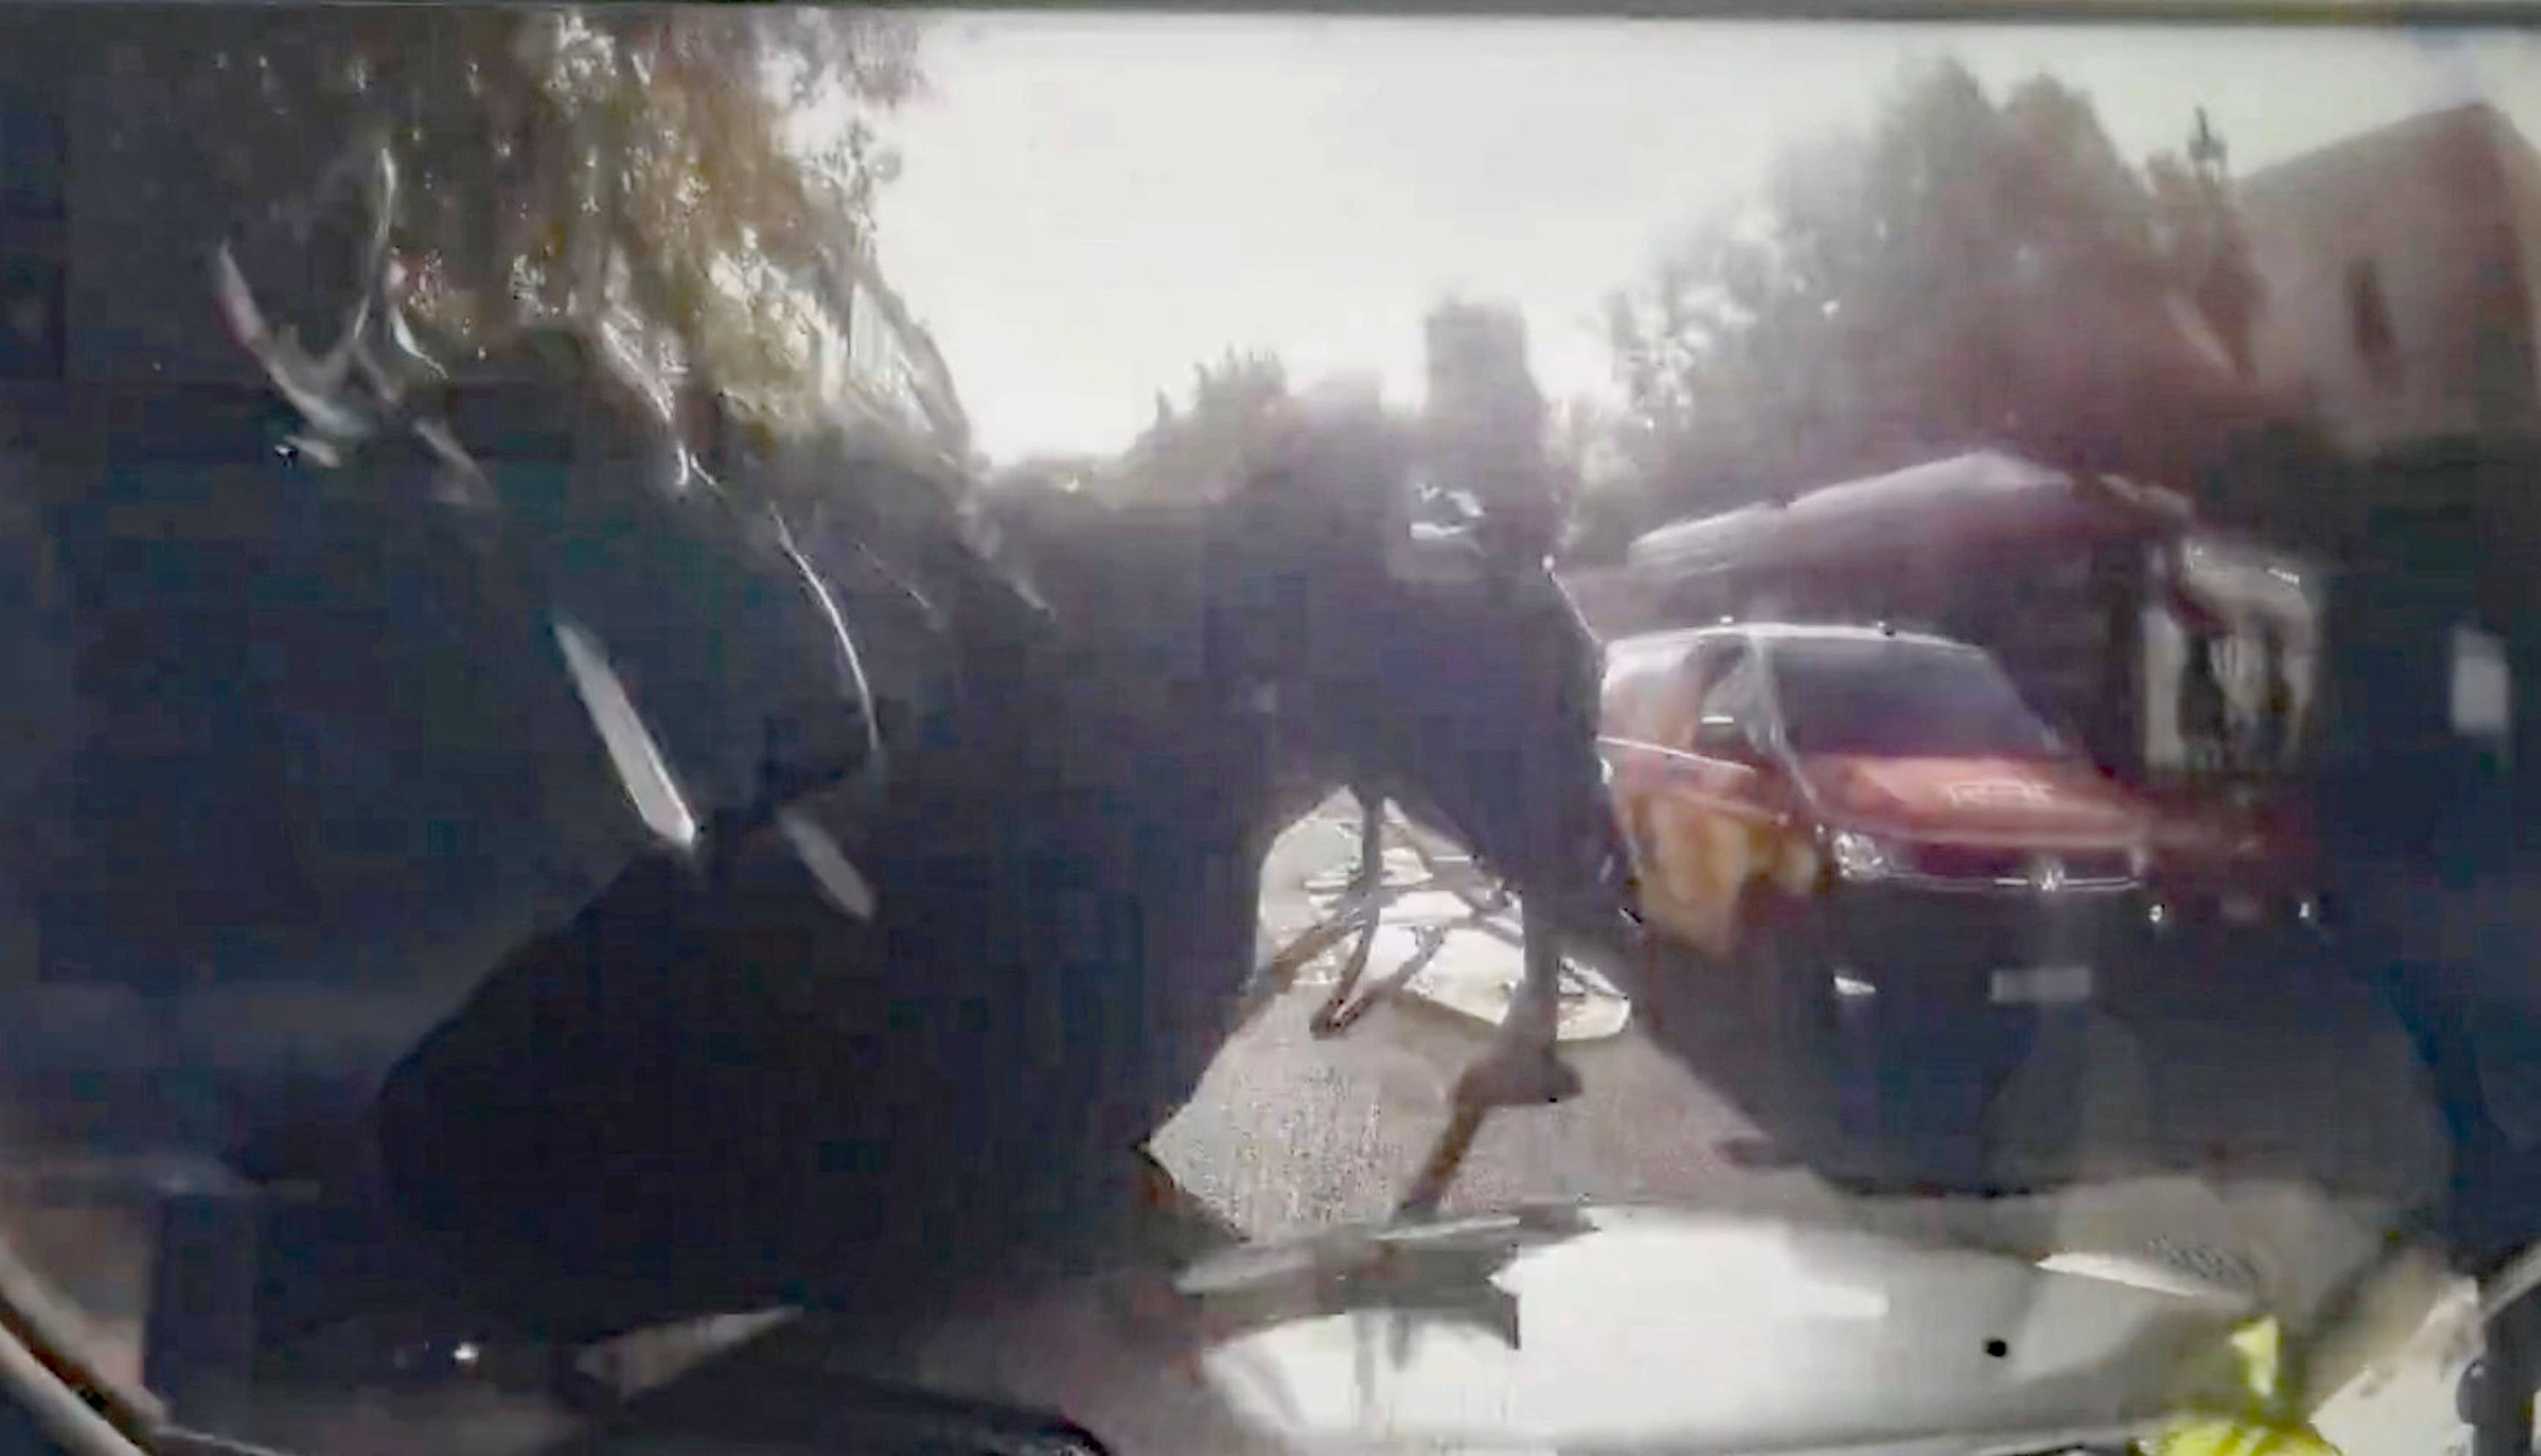 Dashcam footage of a military horse running into a black cab in central London (@Davenoisome/PA)